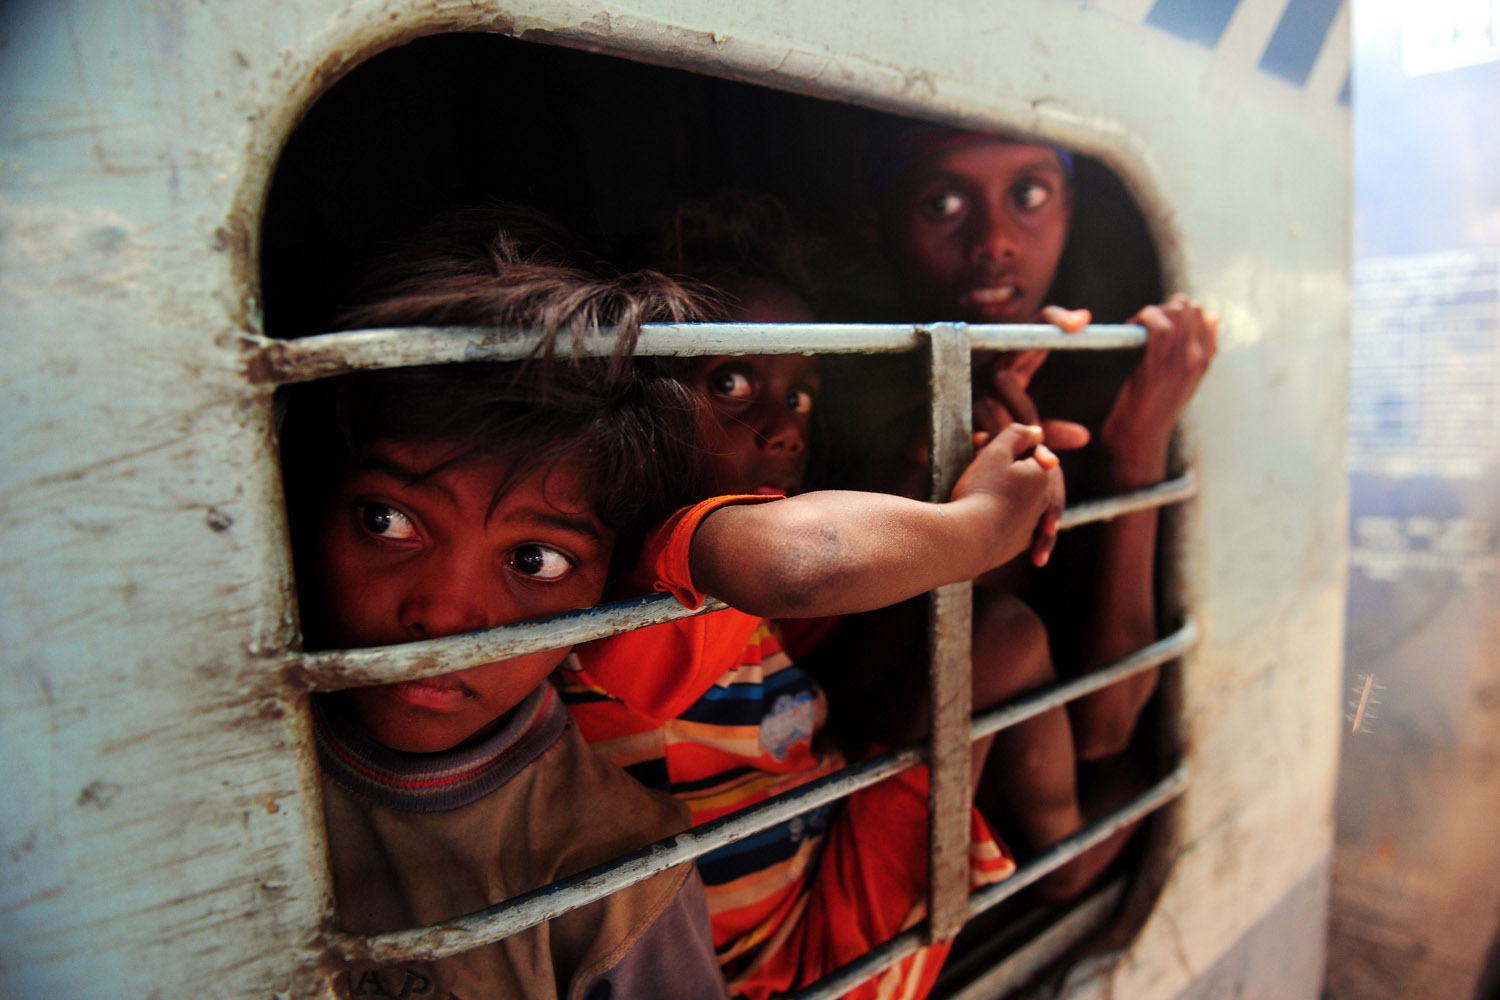 June 22, 2013. Young Indian commuters sit inside a crowded train compartment at Allahabad junction in Allahabad.